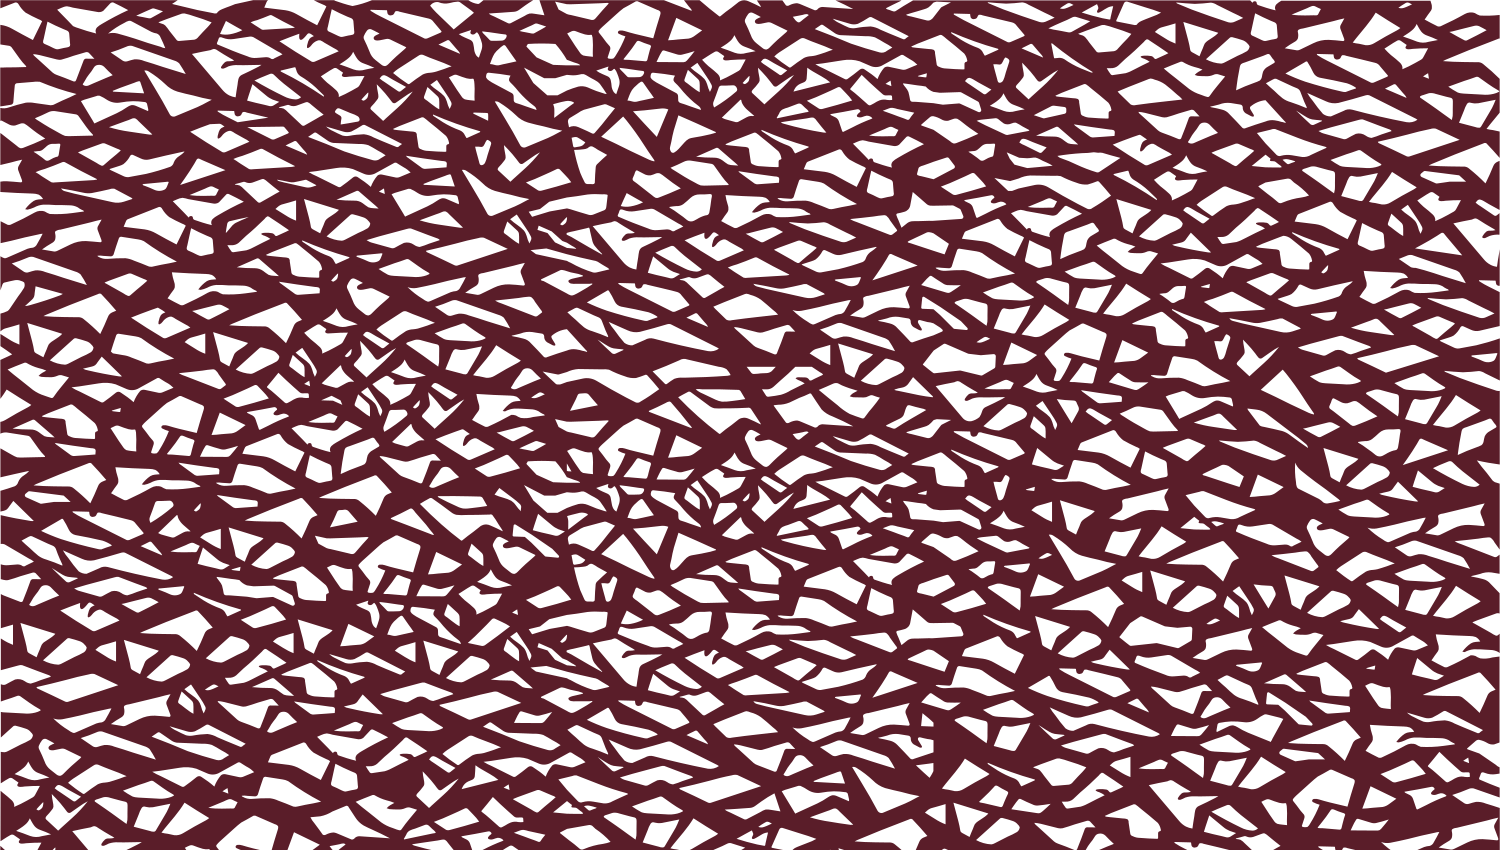 Parasoleil™ Taiga© pattern displayed with a burgundy color overlay